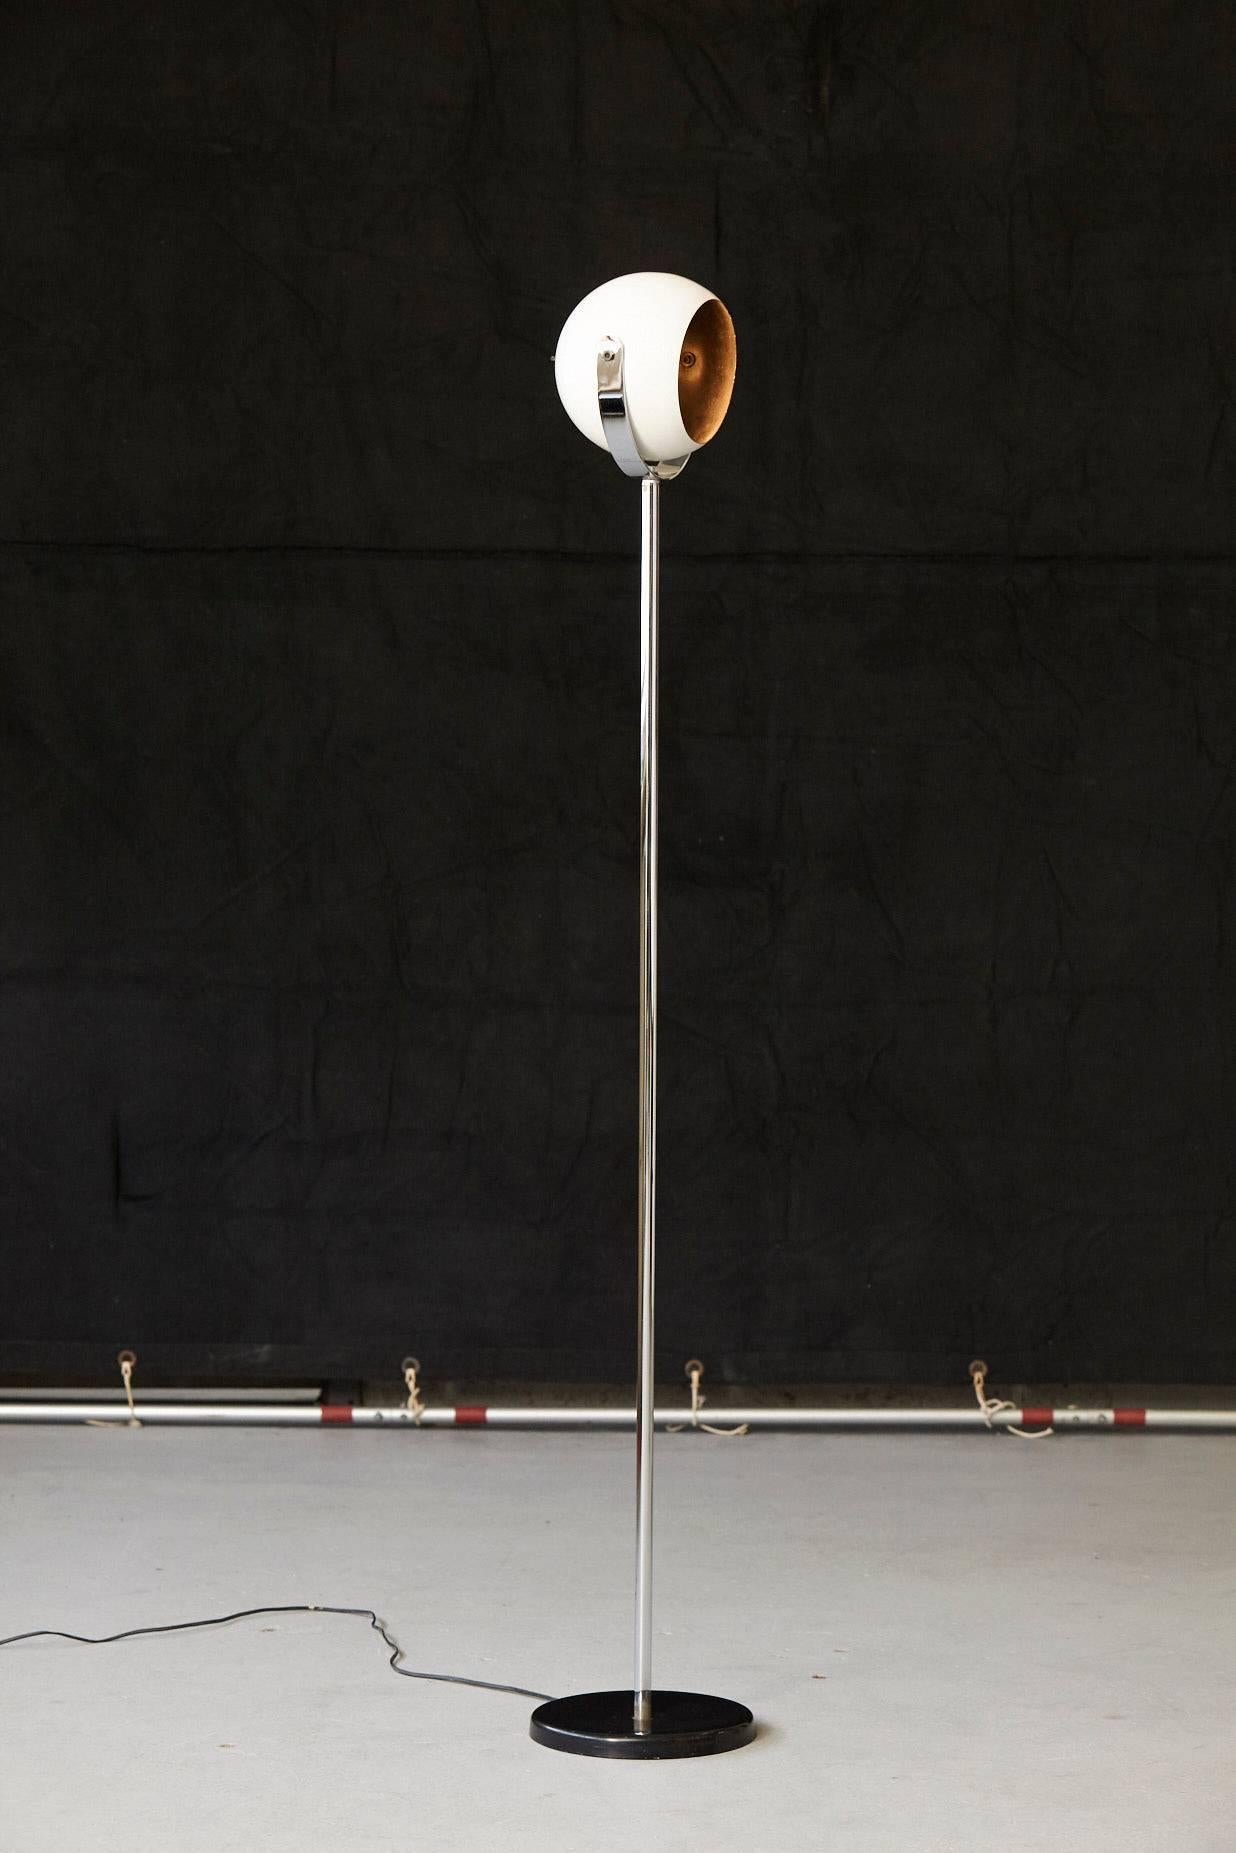 Minimalist eyeball floor lamp in white and chrome with black base in the style of Robert Sonneman. The lamp head is adjustable. Light signs of age, please refer to the photos.